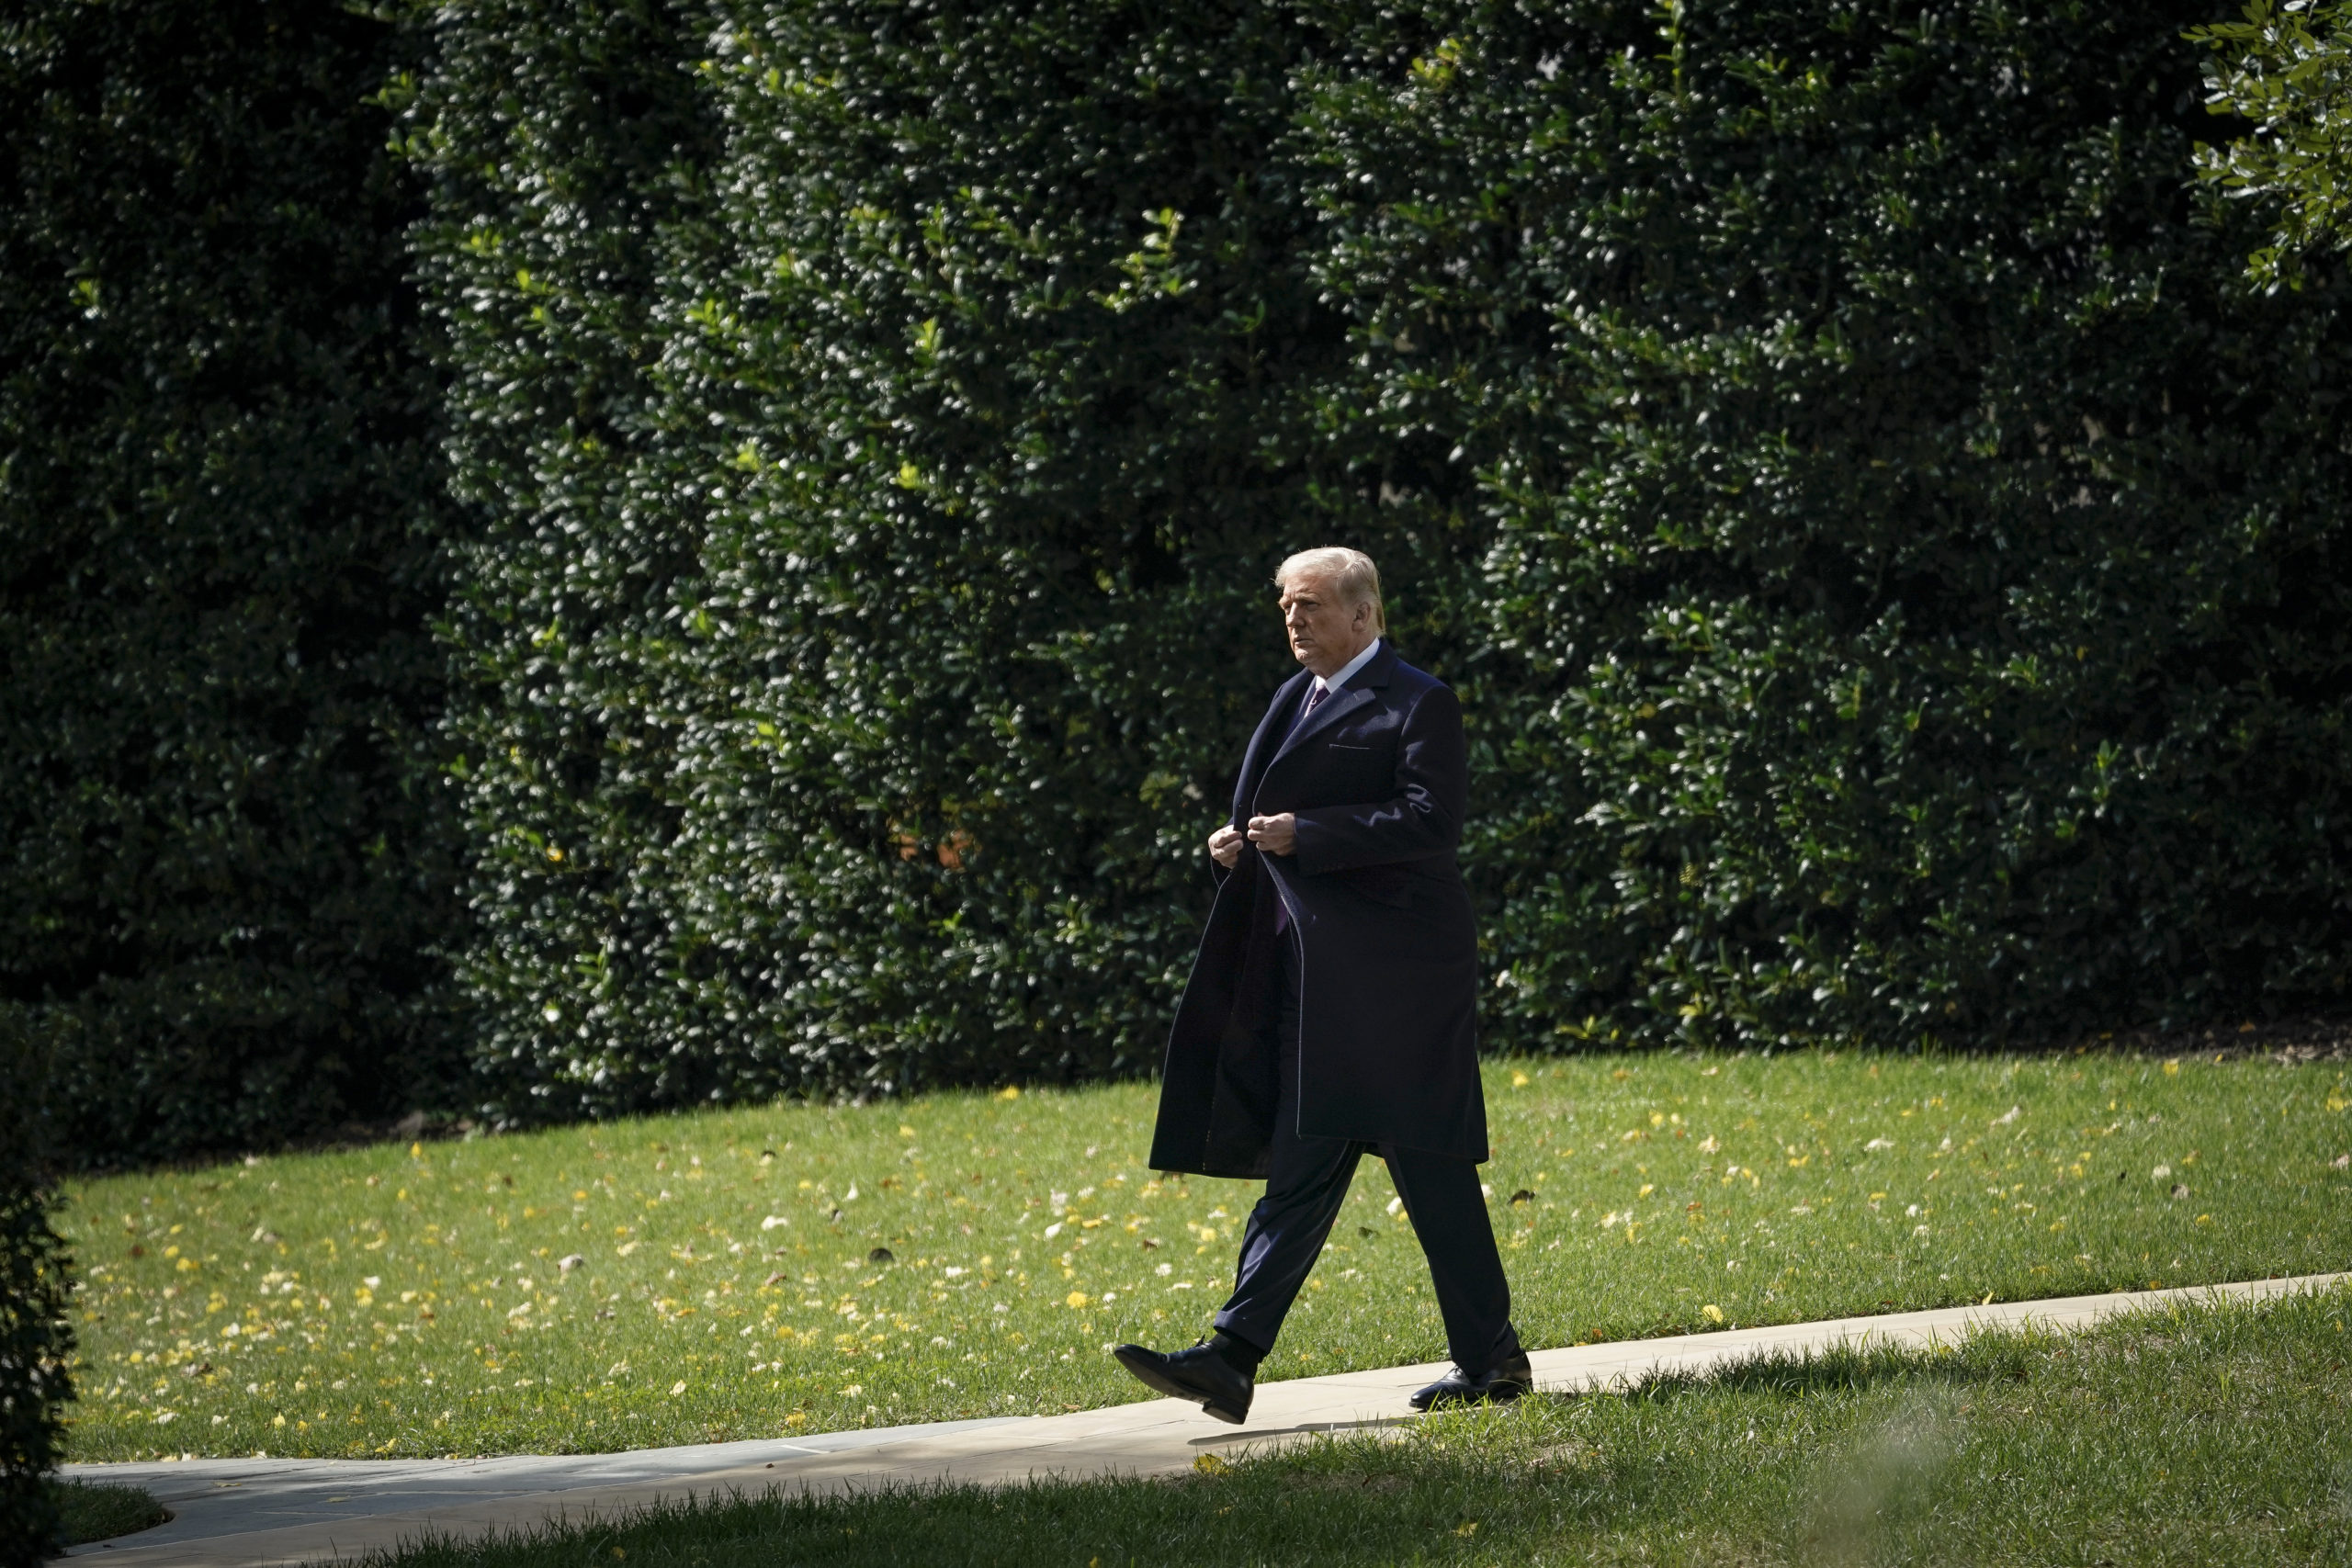 WASHINGTON, DC - OCTOBER 01: U.S. President Donald Trump exits the Oval Office and walks to Marine One on the South Lawn of the White House on October 1, 2020 in Washington, DC. President Trump is traveling to Bedminster, New Jersey on Thursday for a roundtable event with supporters and a fundraiser. (Photo by Drew Angerer/Getty Images)